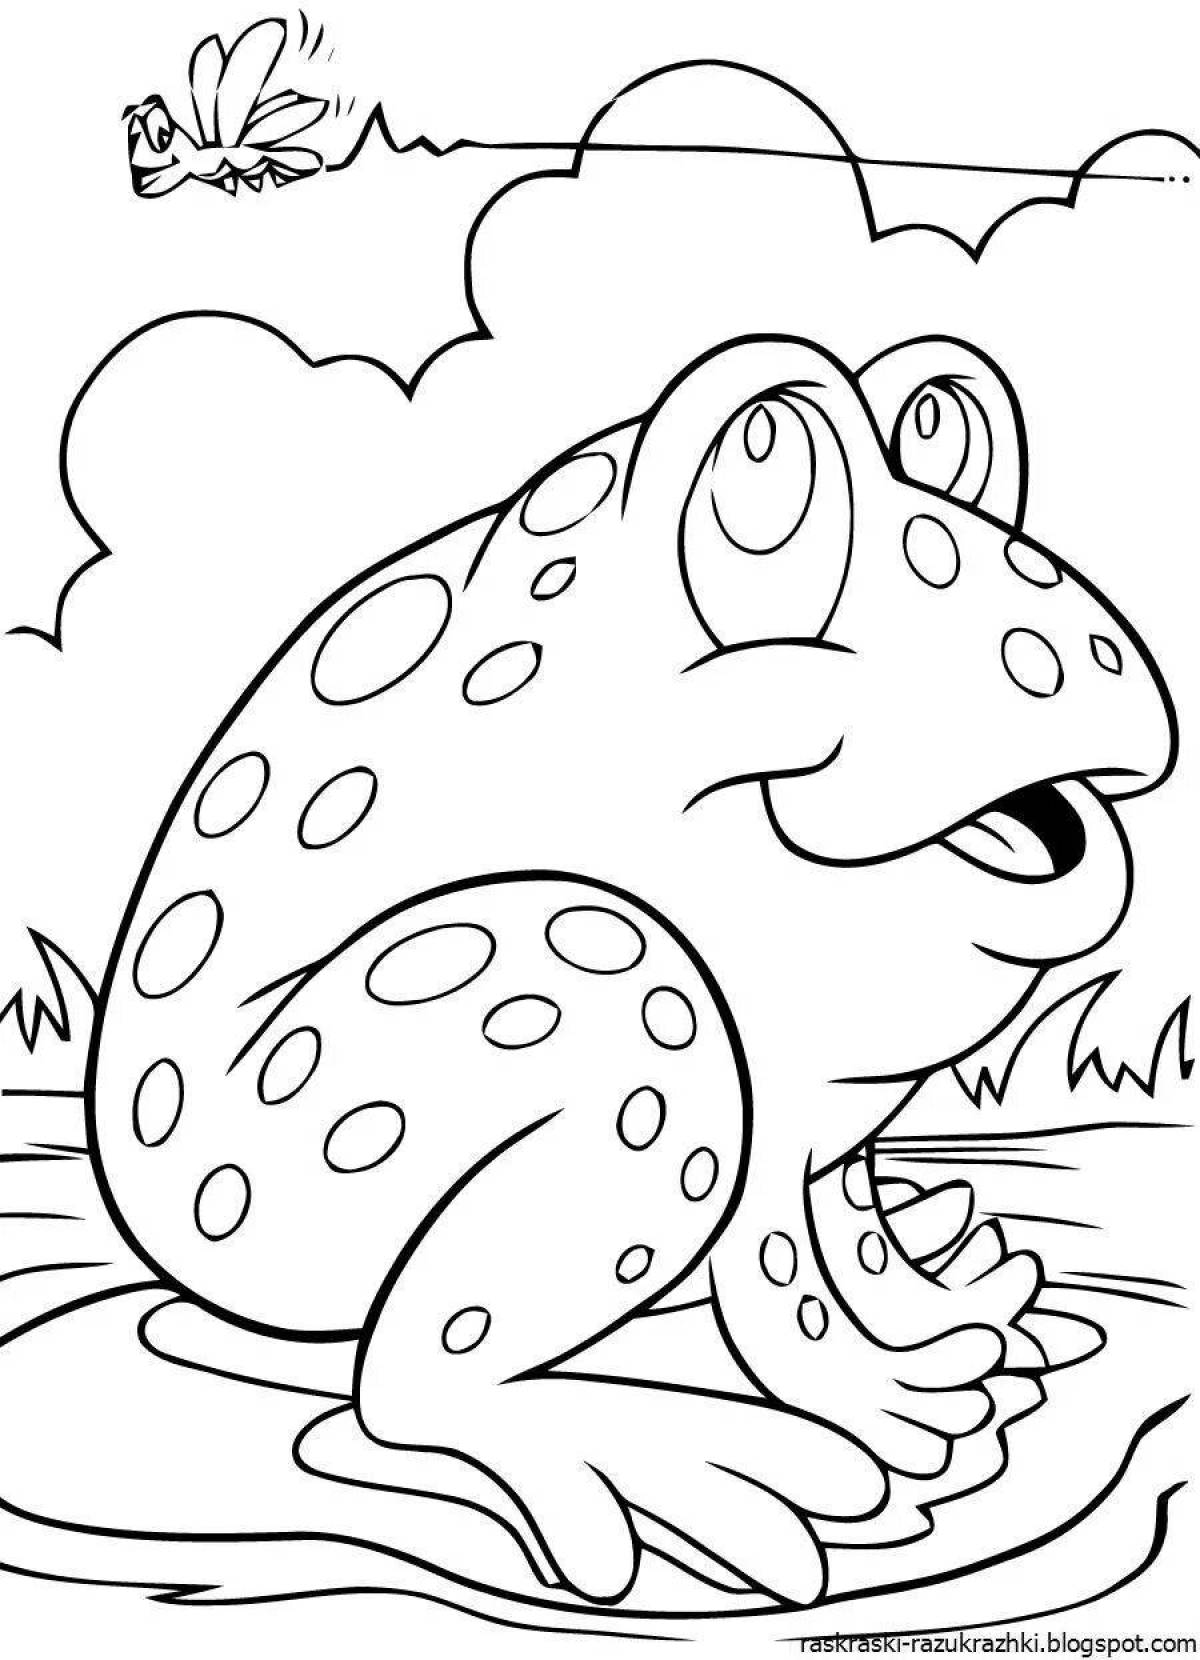 Creative animal coloring pages for kids 6-7 years old